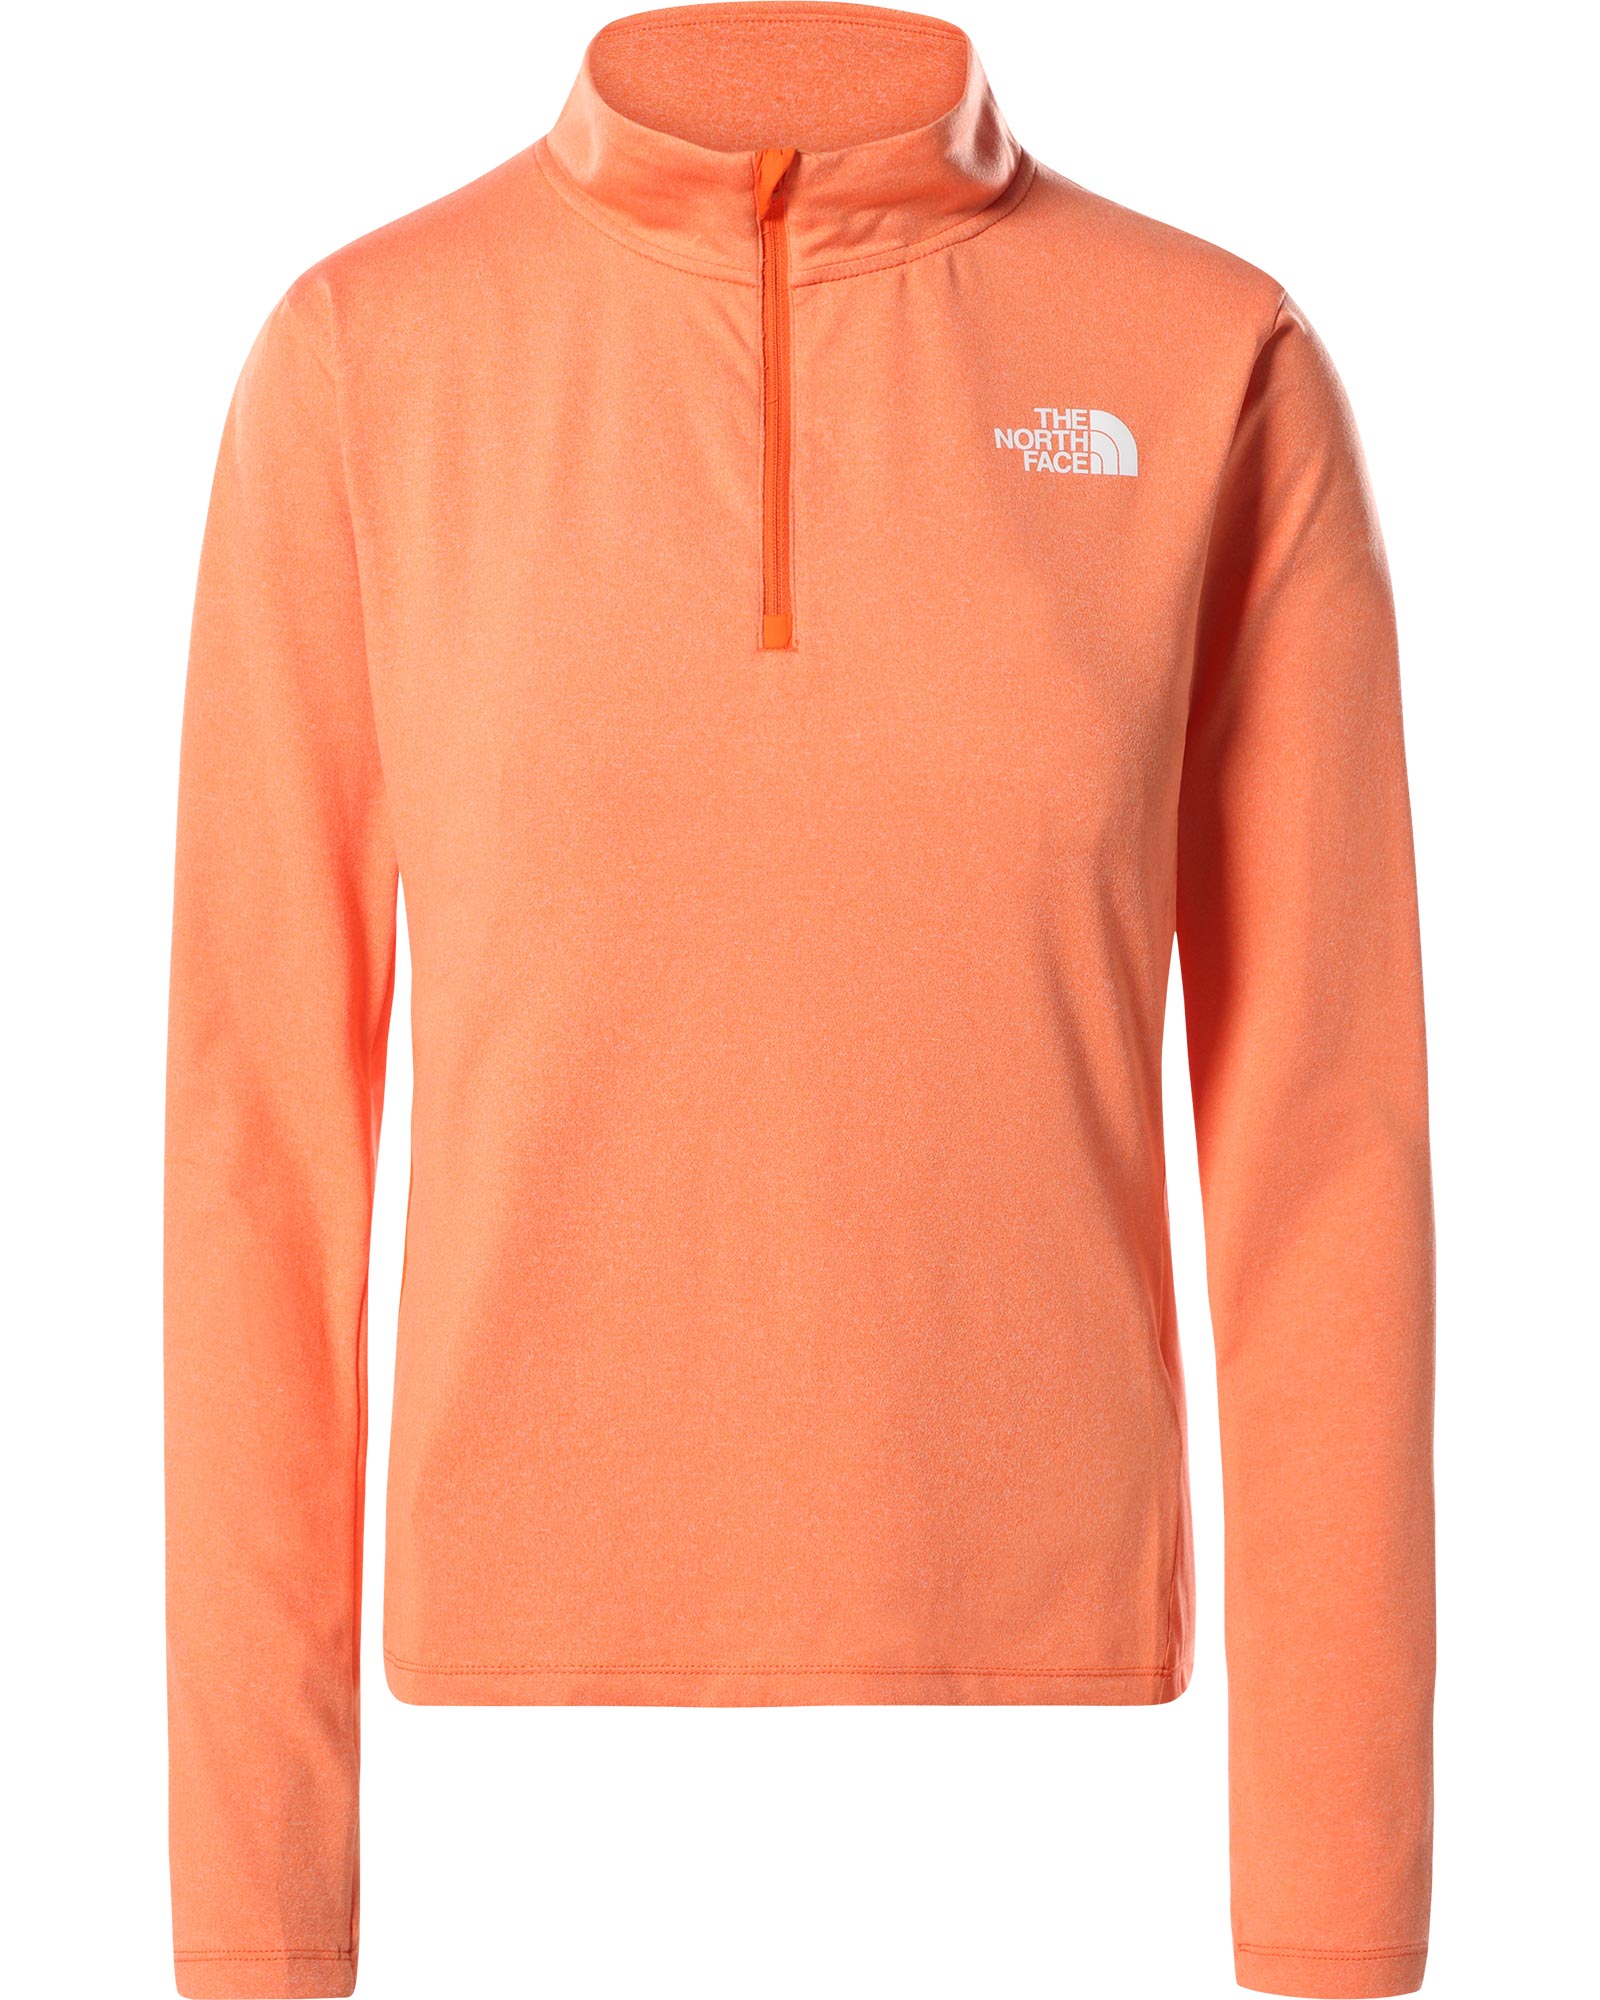 The North Face Riseway Women’s 1/2 Zip Top - Flame Heather S